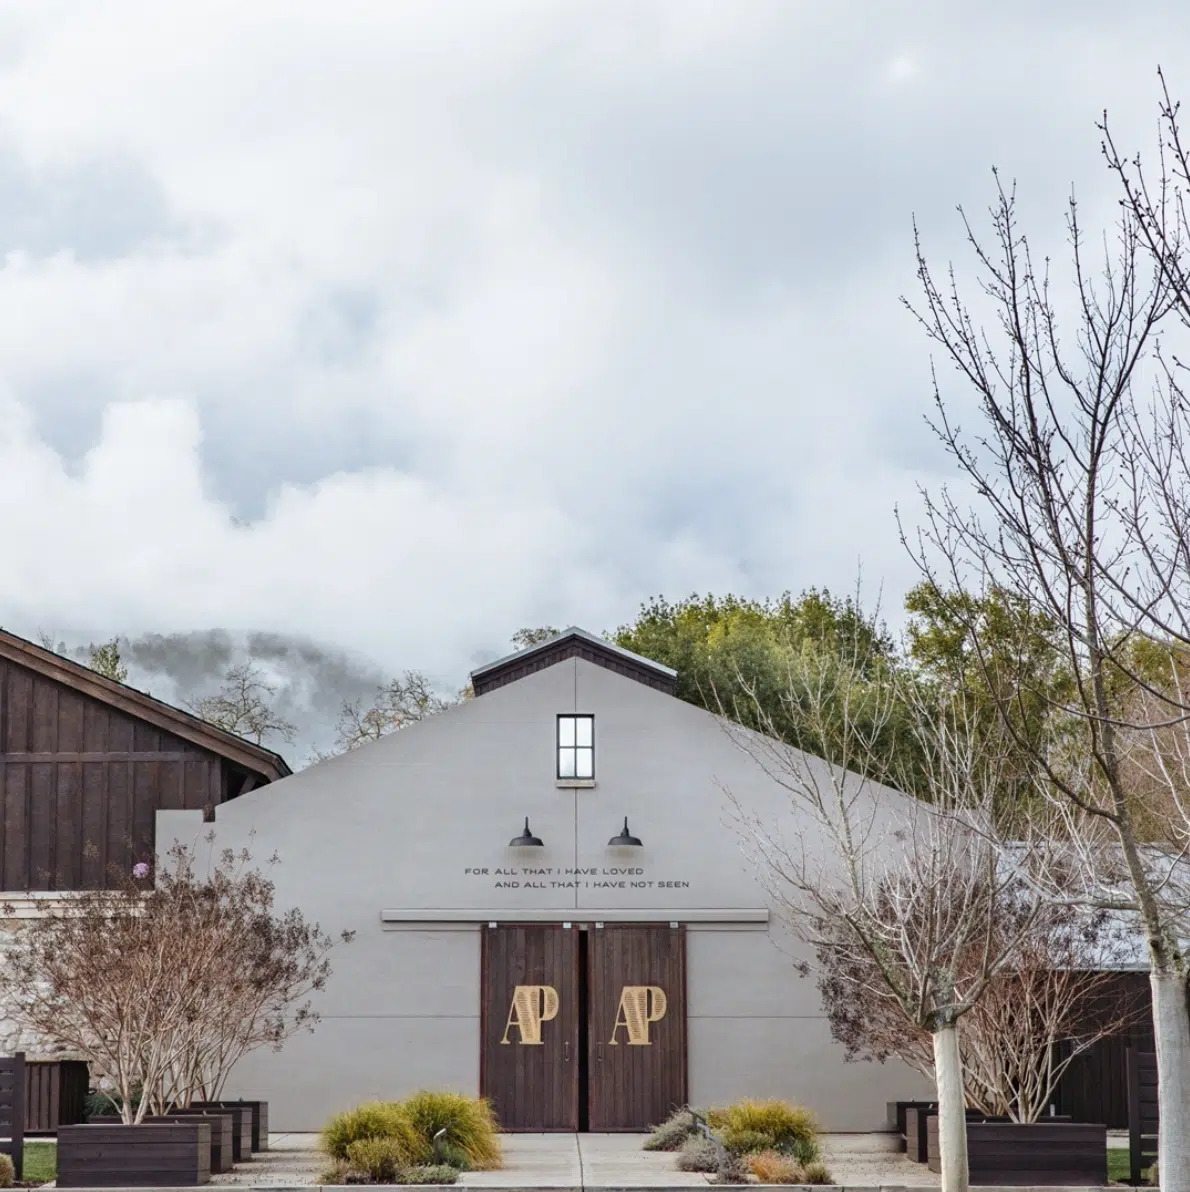 The best Glen Ellen wineries, by Travel Blogger What The Fab